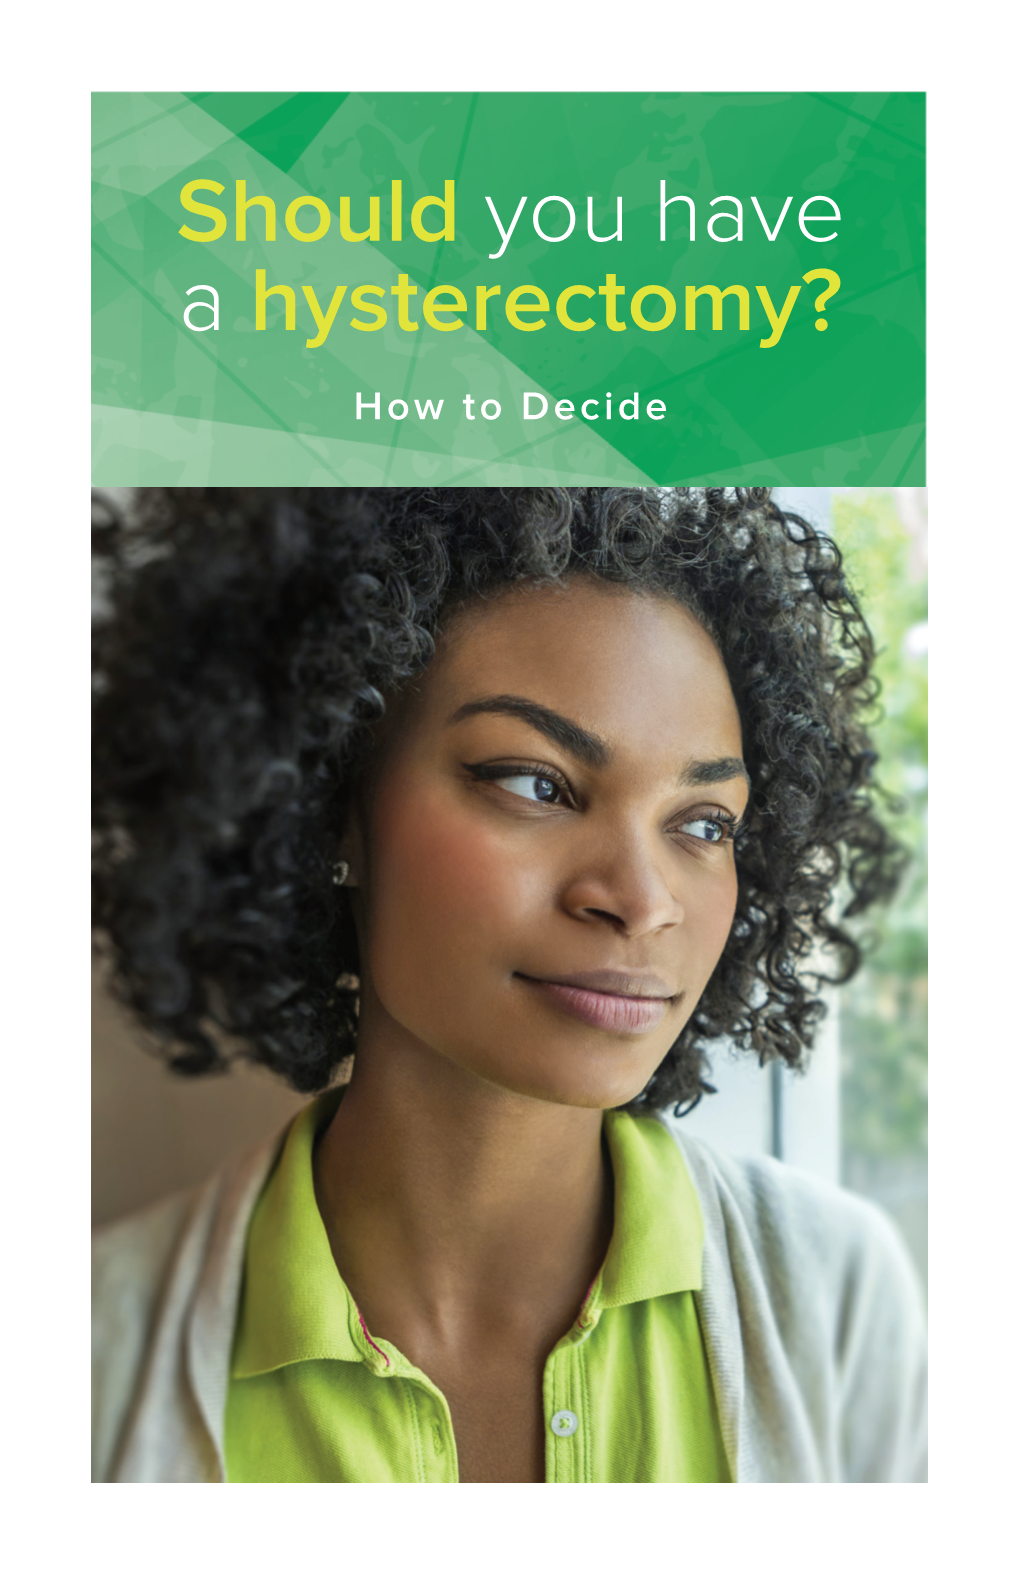 Should You Have a Hysterectomy? How to Decide Contents 1